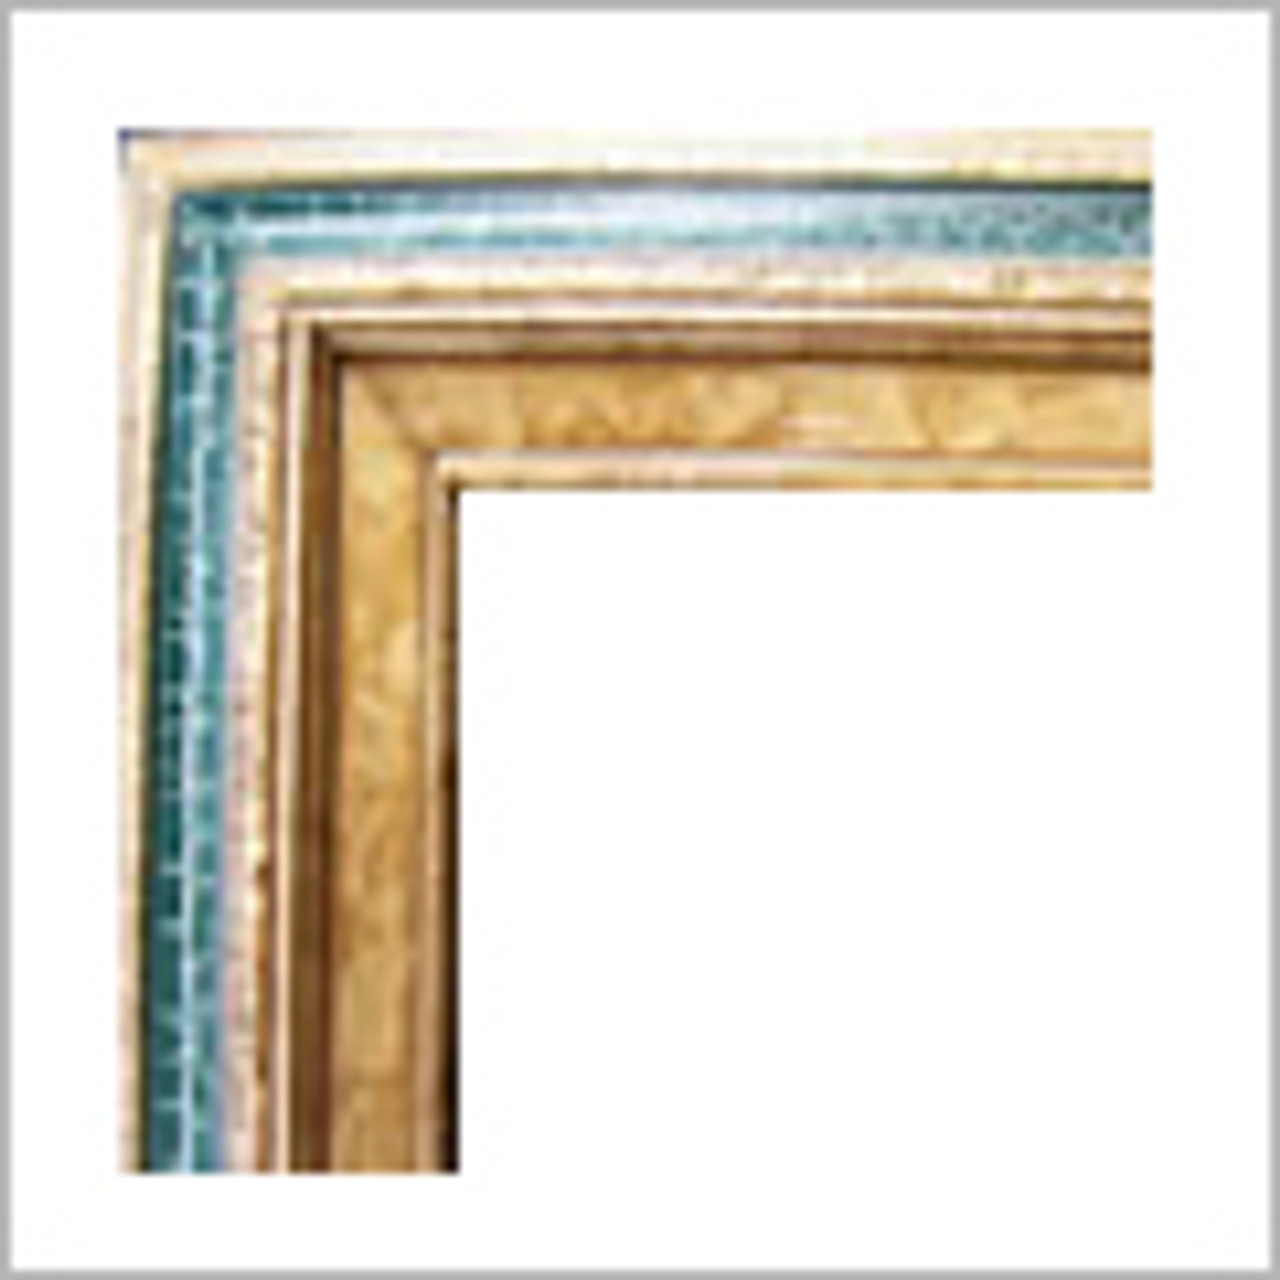  3 Inch Deluxe Wood Frames: 24X32